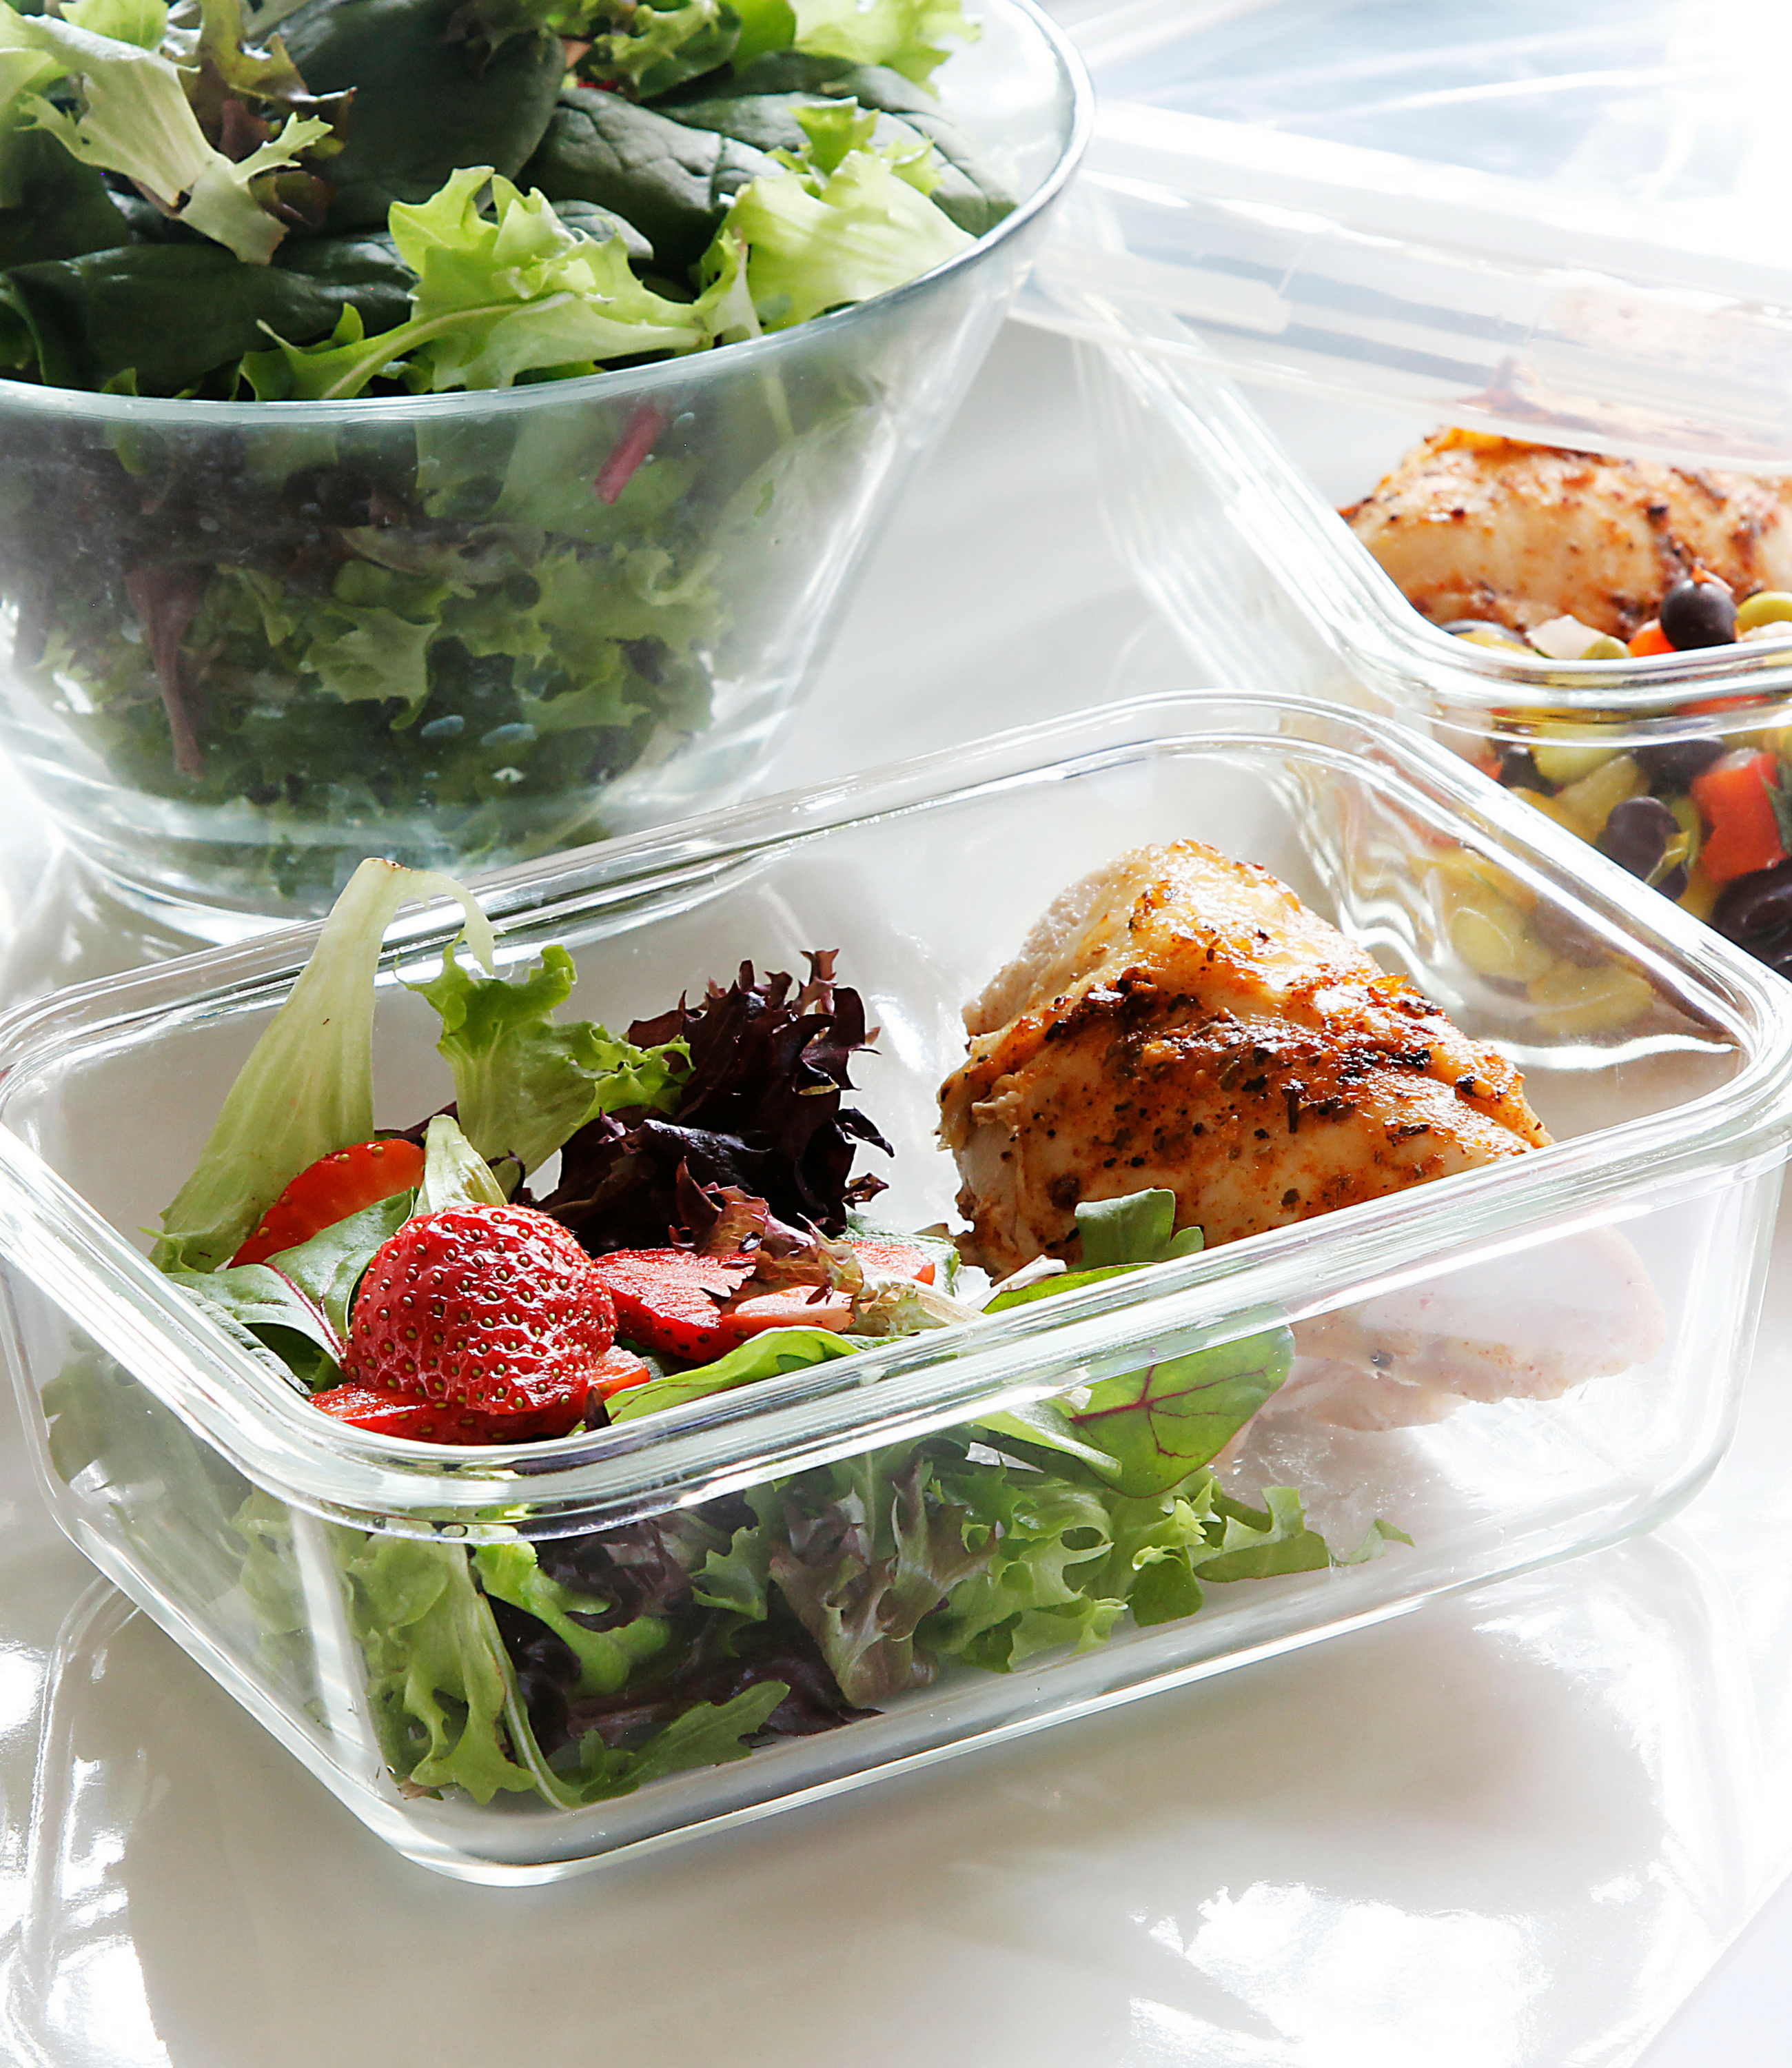 1 Compartment Glass Meal Prep Containers (3 Pack, 35 oz) - Glass Food – FIT  Strong & Healthy